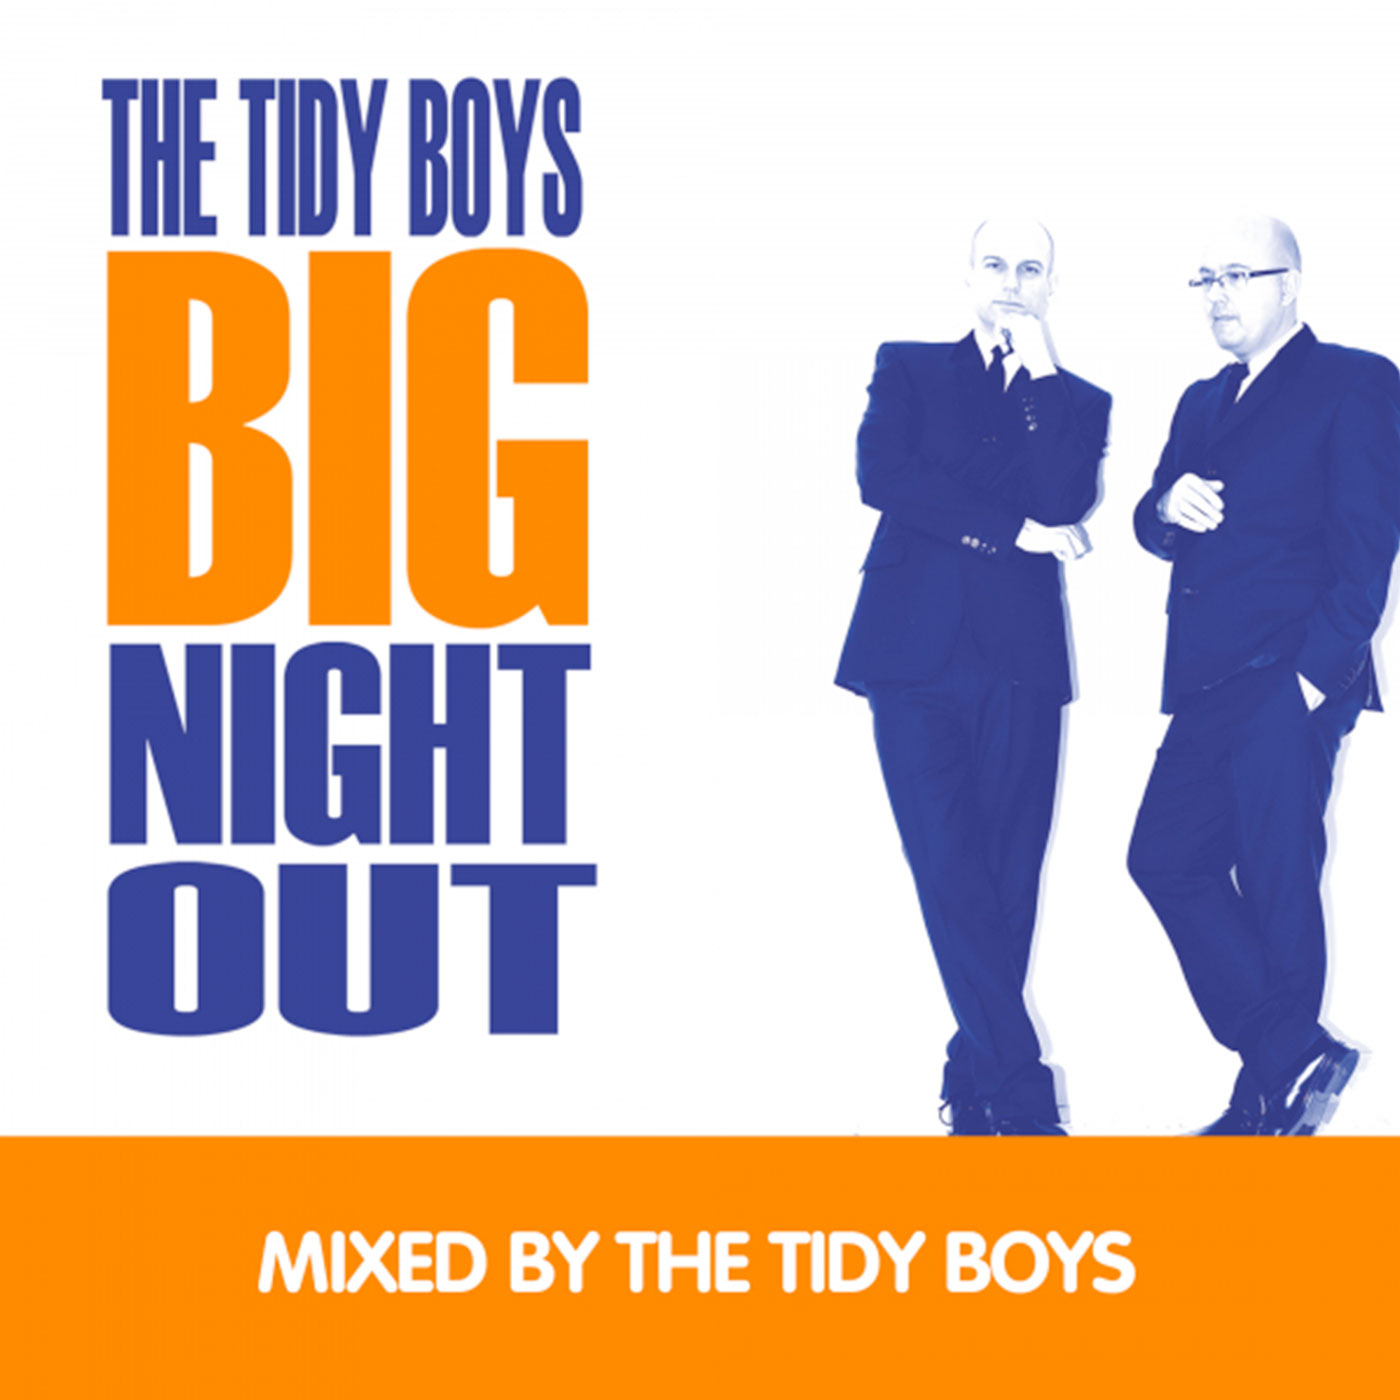 The Tidy Boys Big Night Out - The Tidy Boys